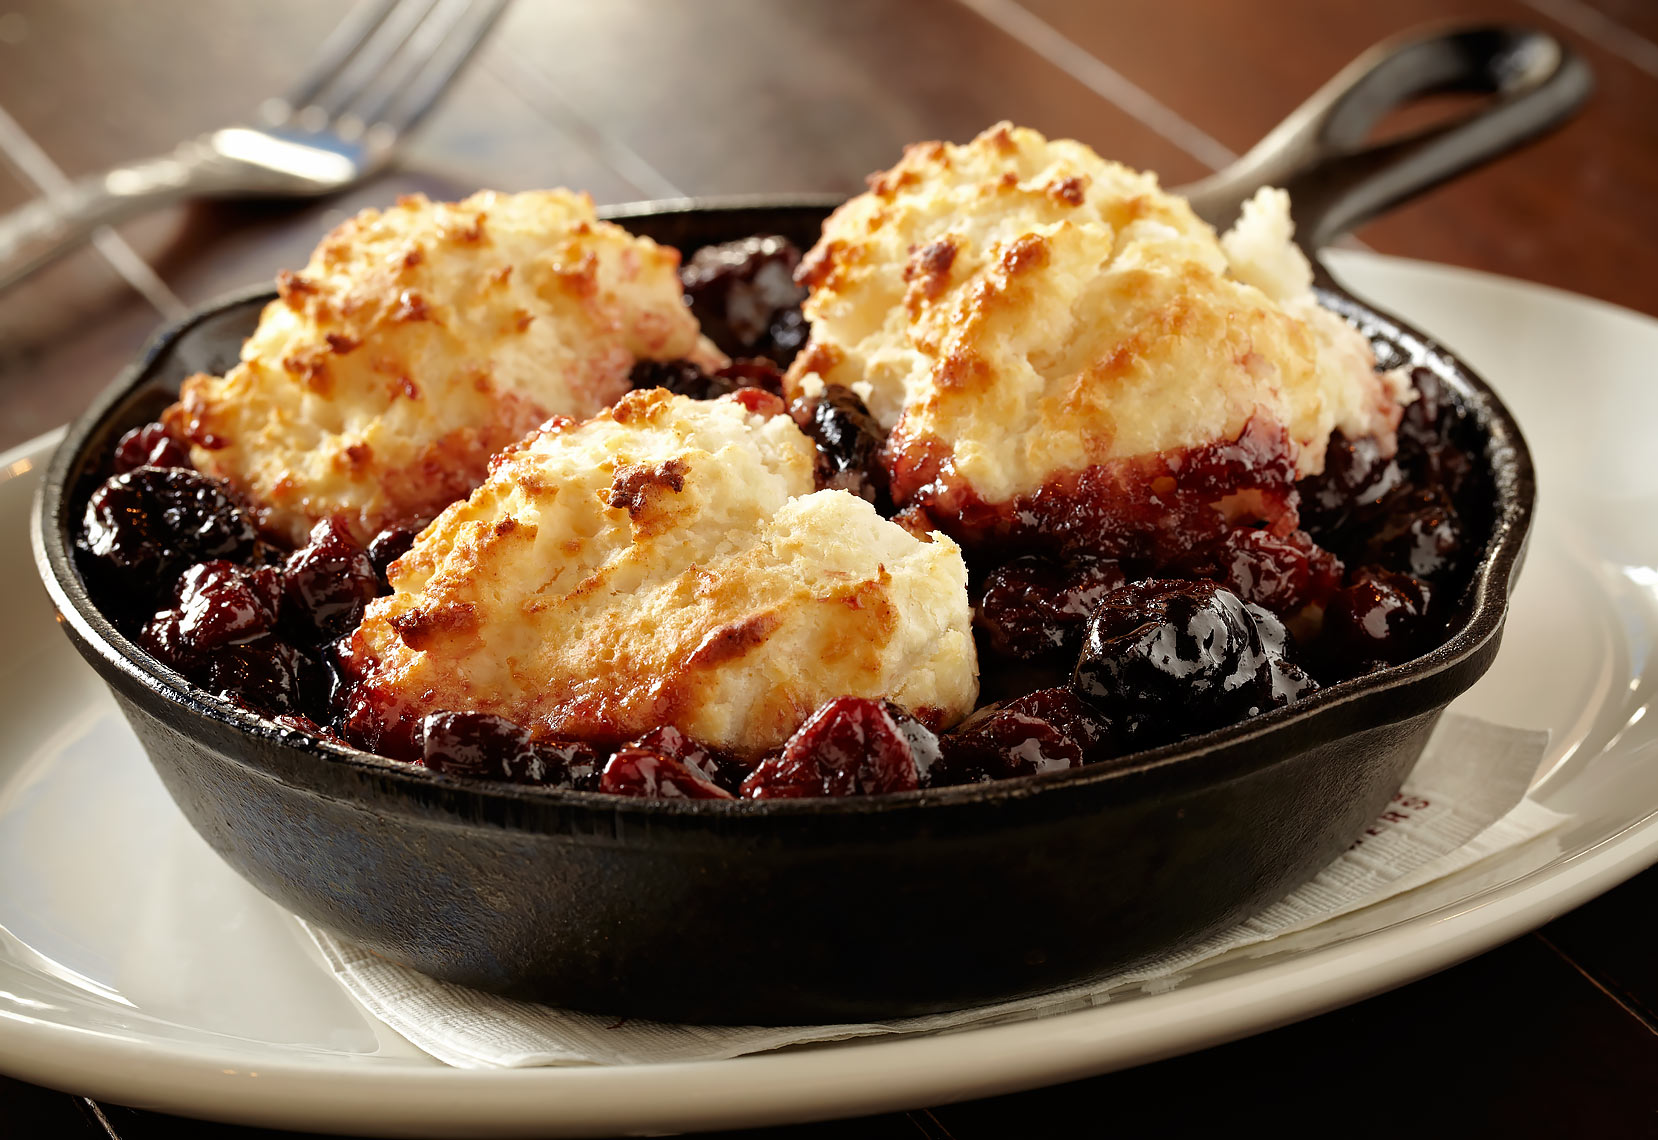 FOOD-Desserts11-Farmers-Fishers-Blueberry-Skillet